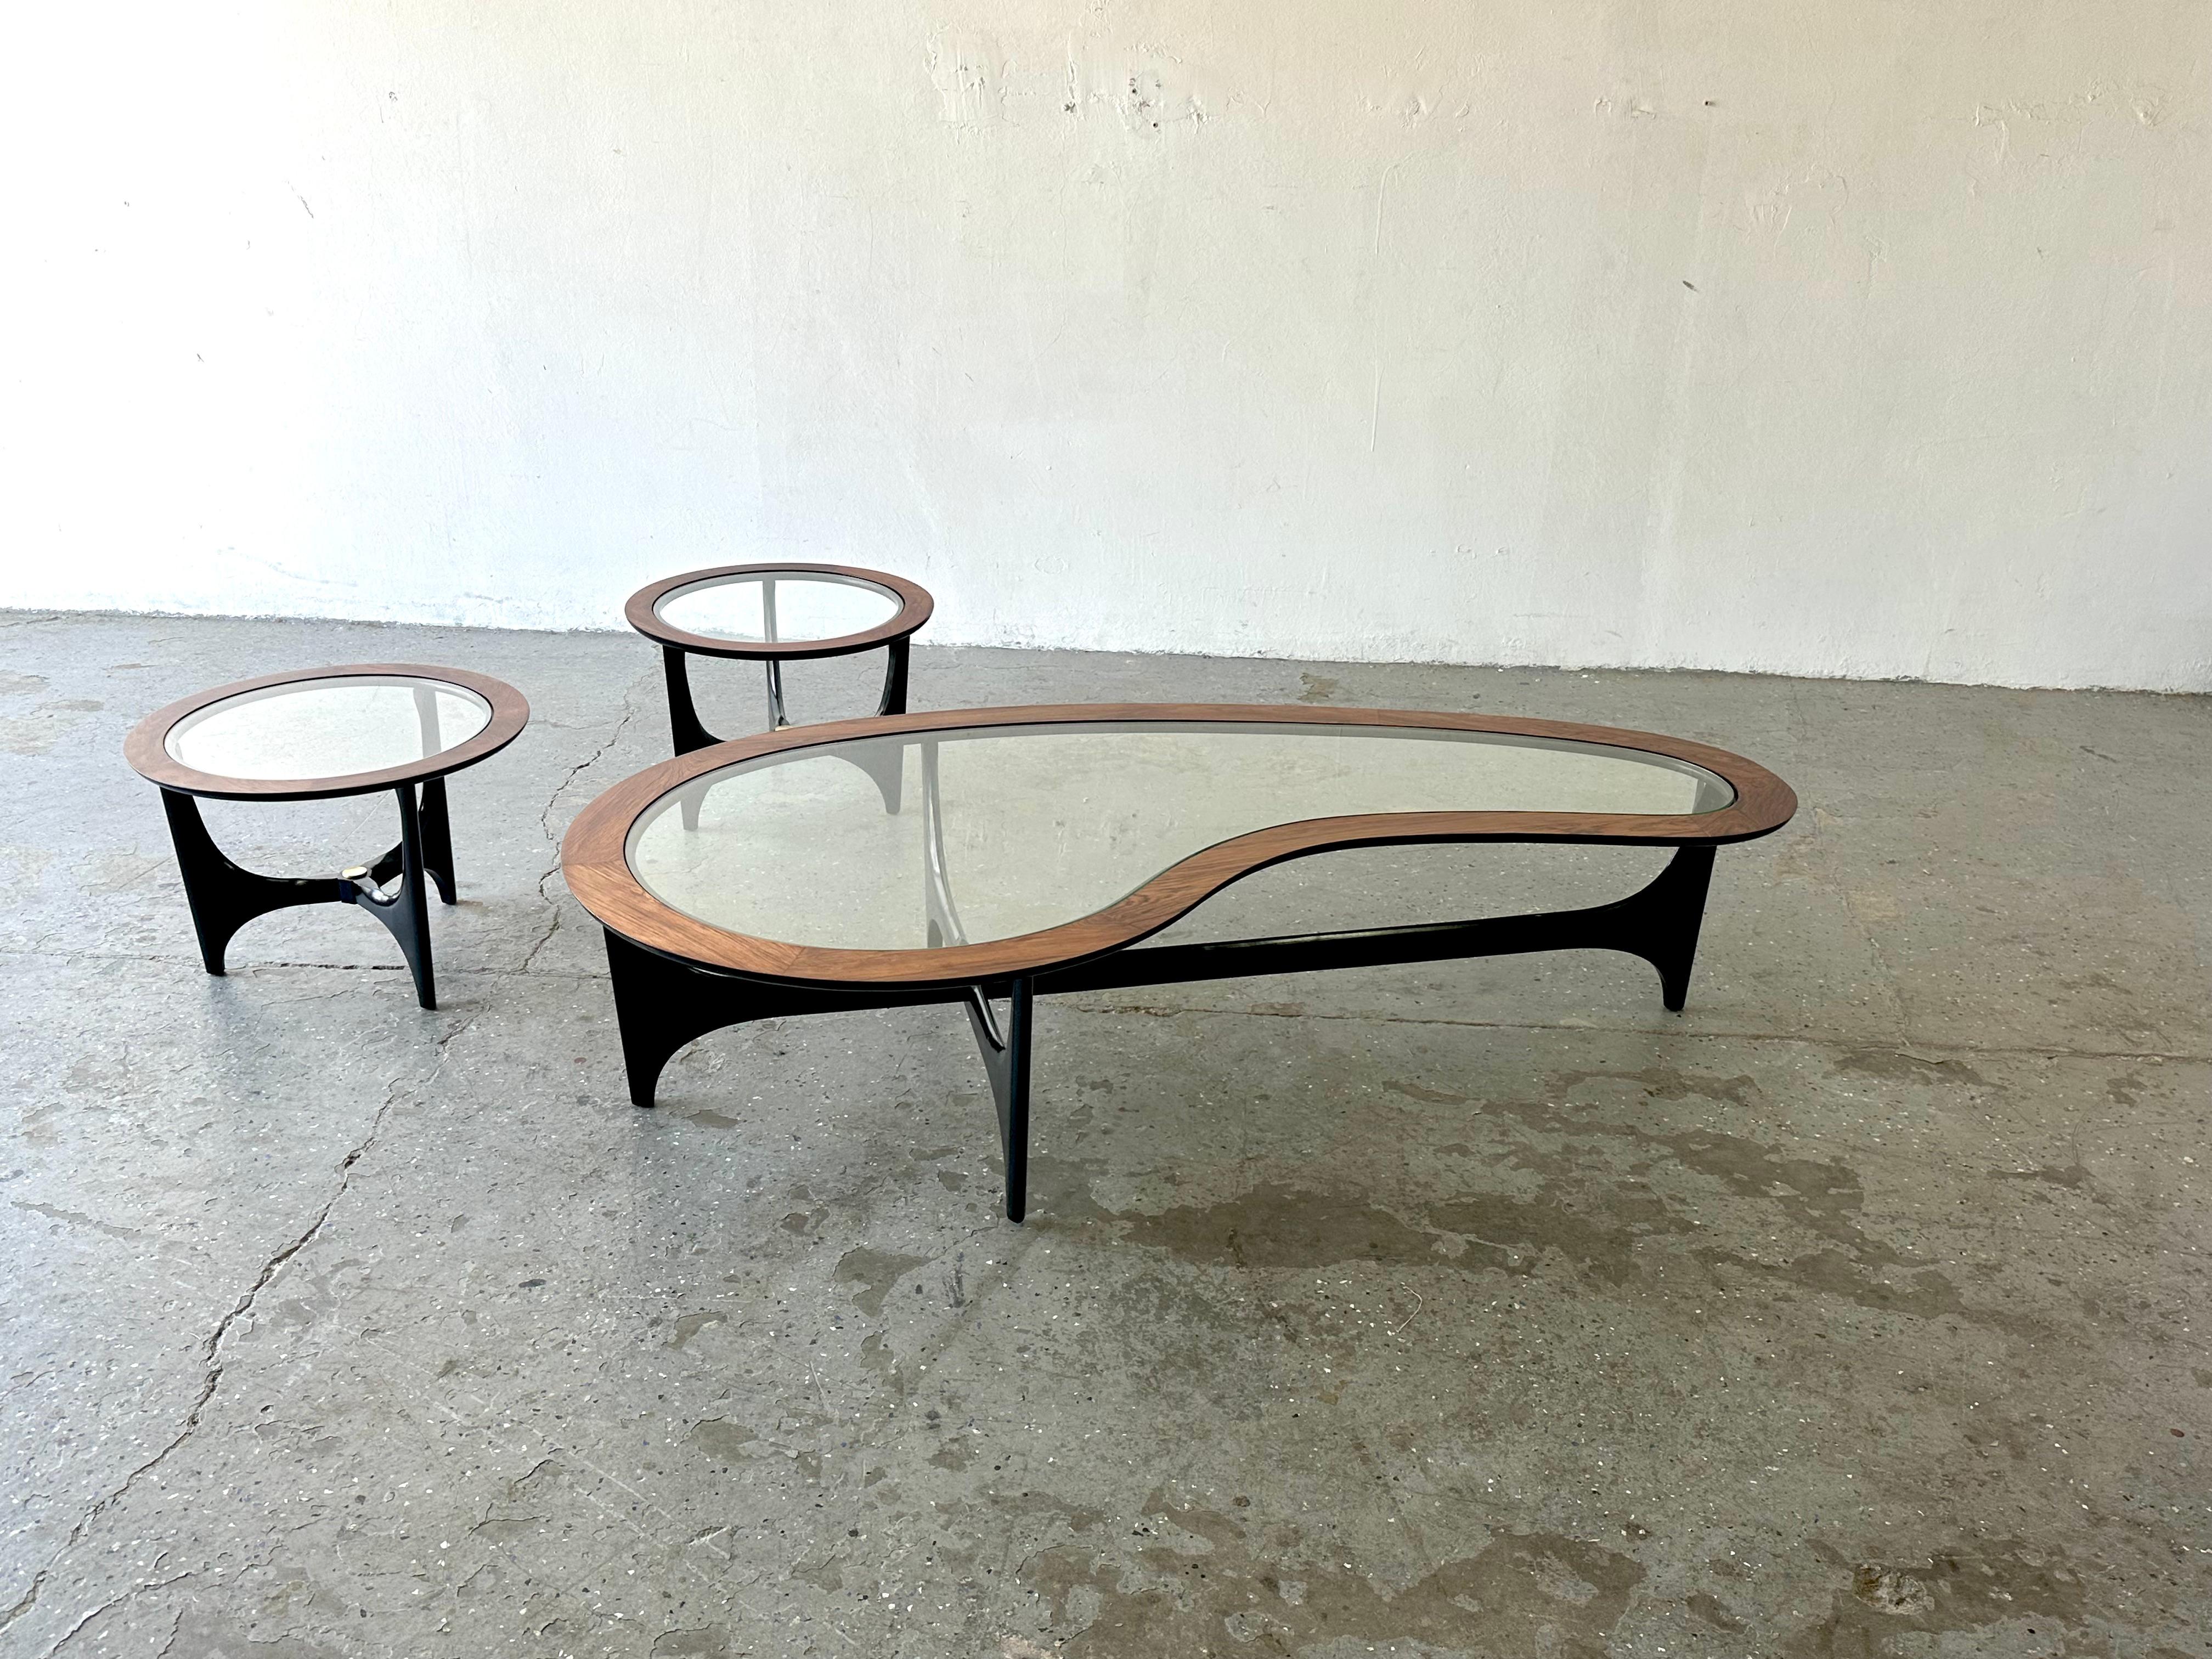 This rosewood Biomorphic / Kidney shaped coffee table & pair of round matching side tables set is often attributed to Adrian Pearsall but is designed by André Bus, for Lane as part of the 